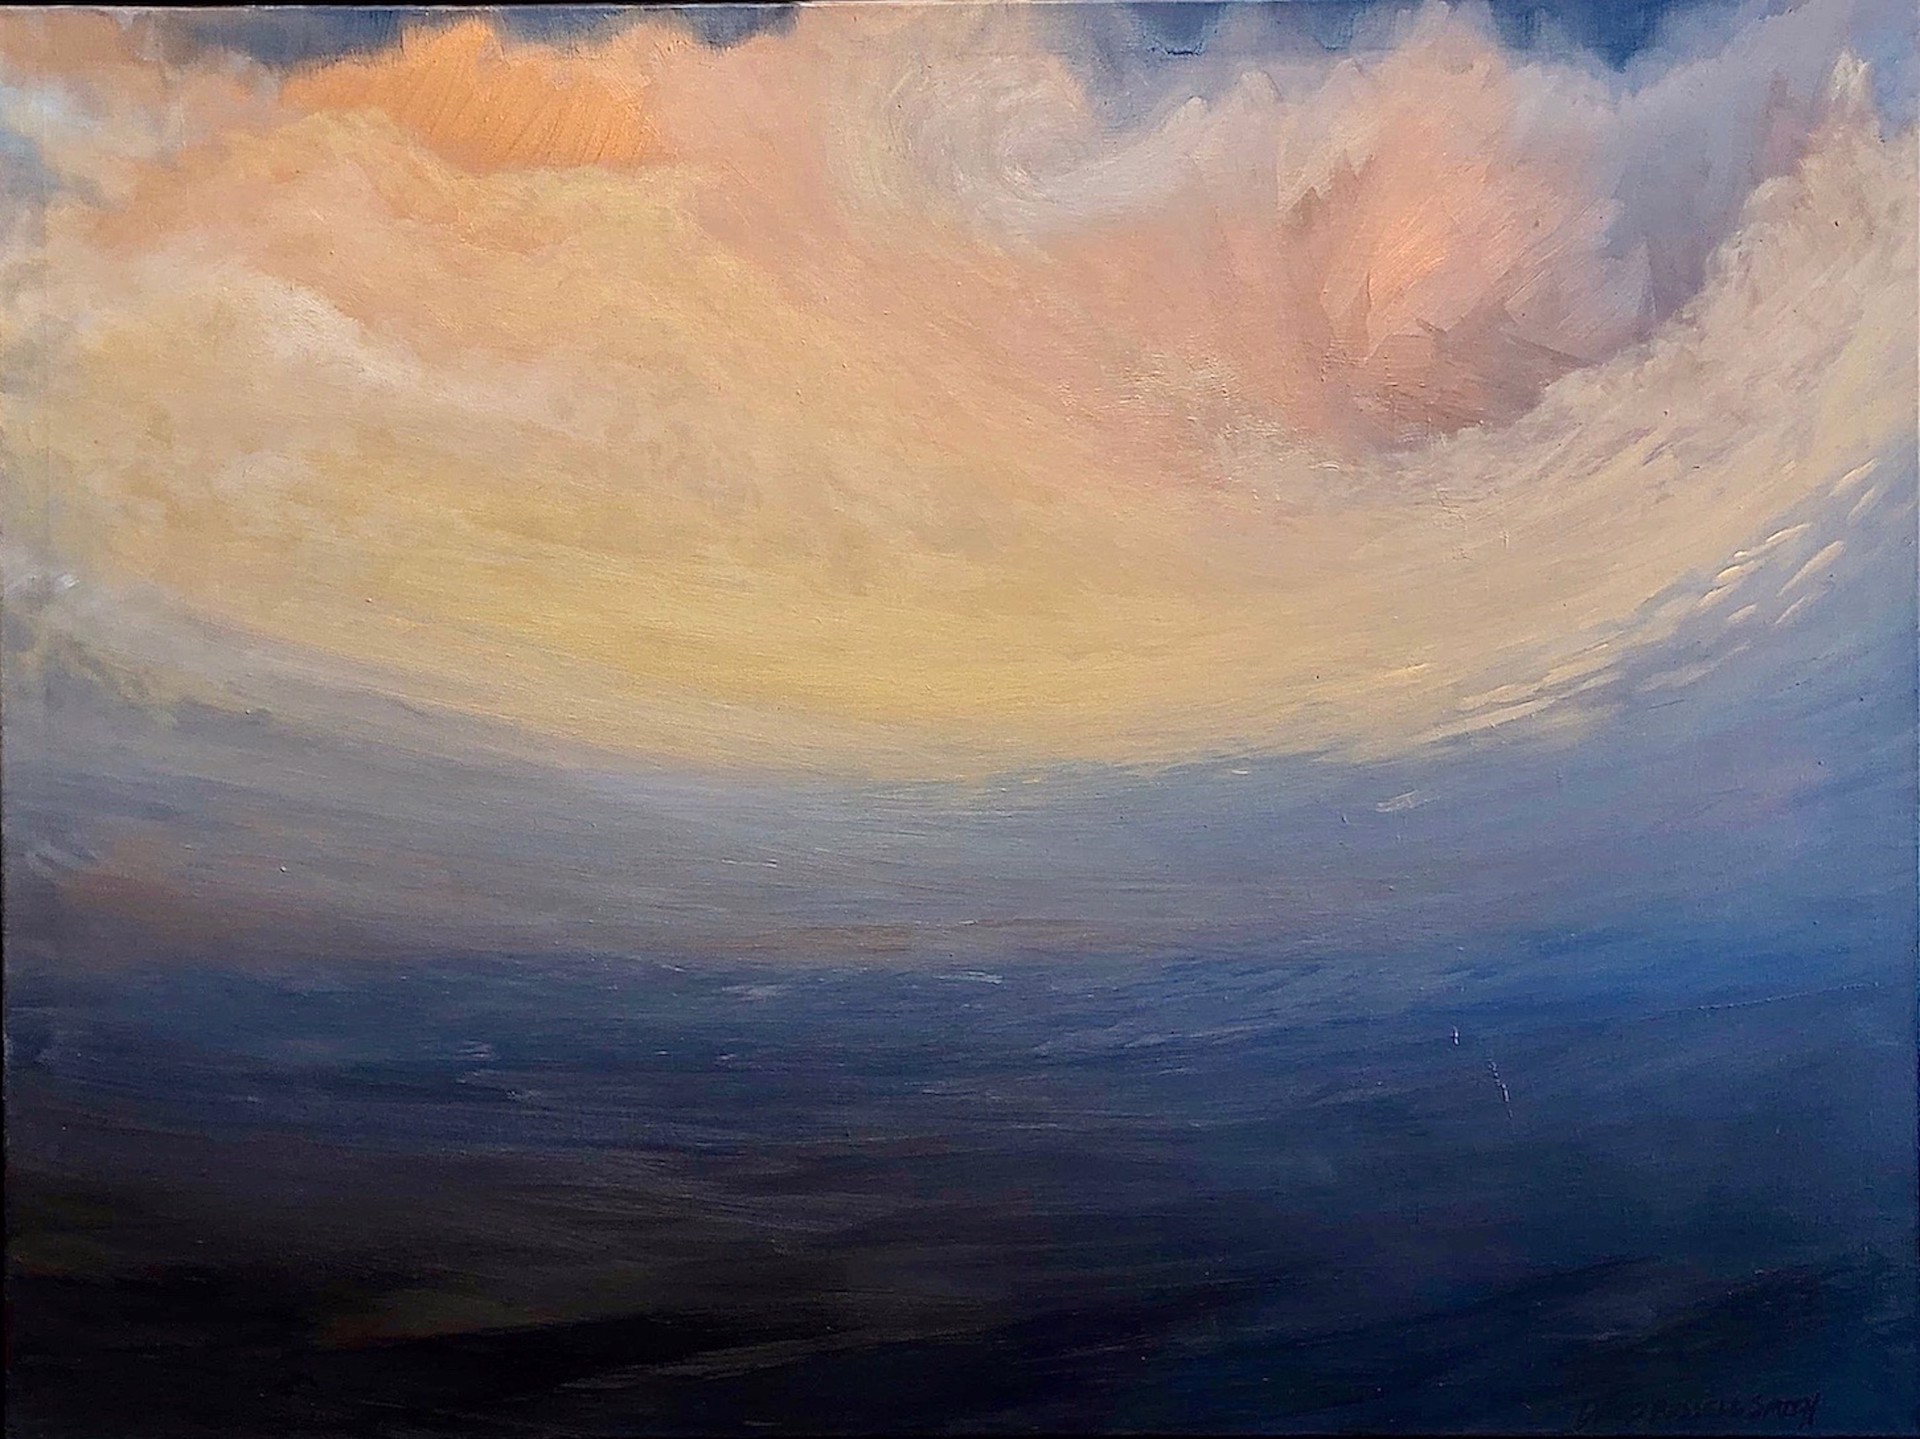 Surreal Skies, No. 4 by David Russell Smith